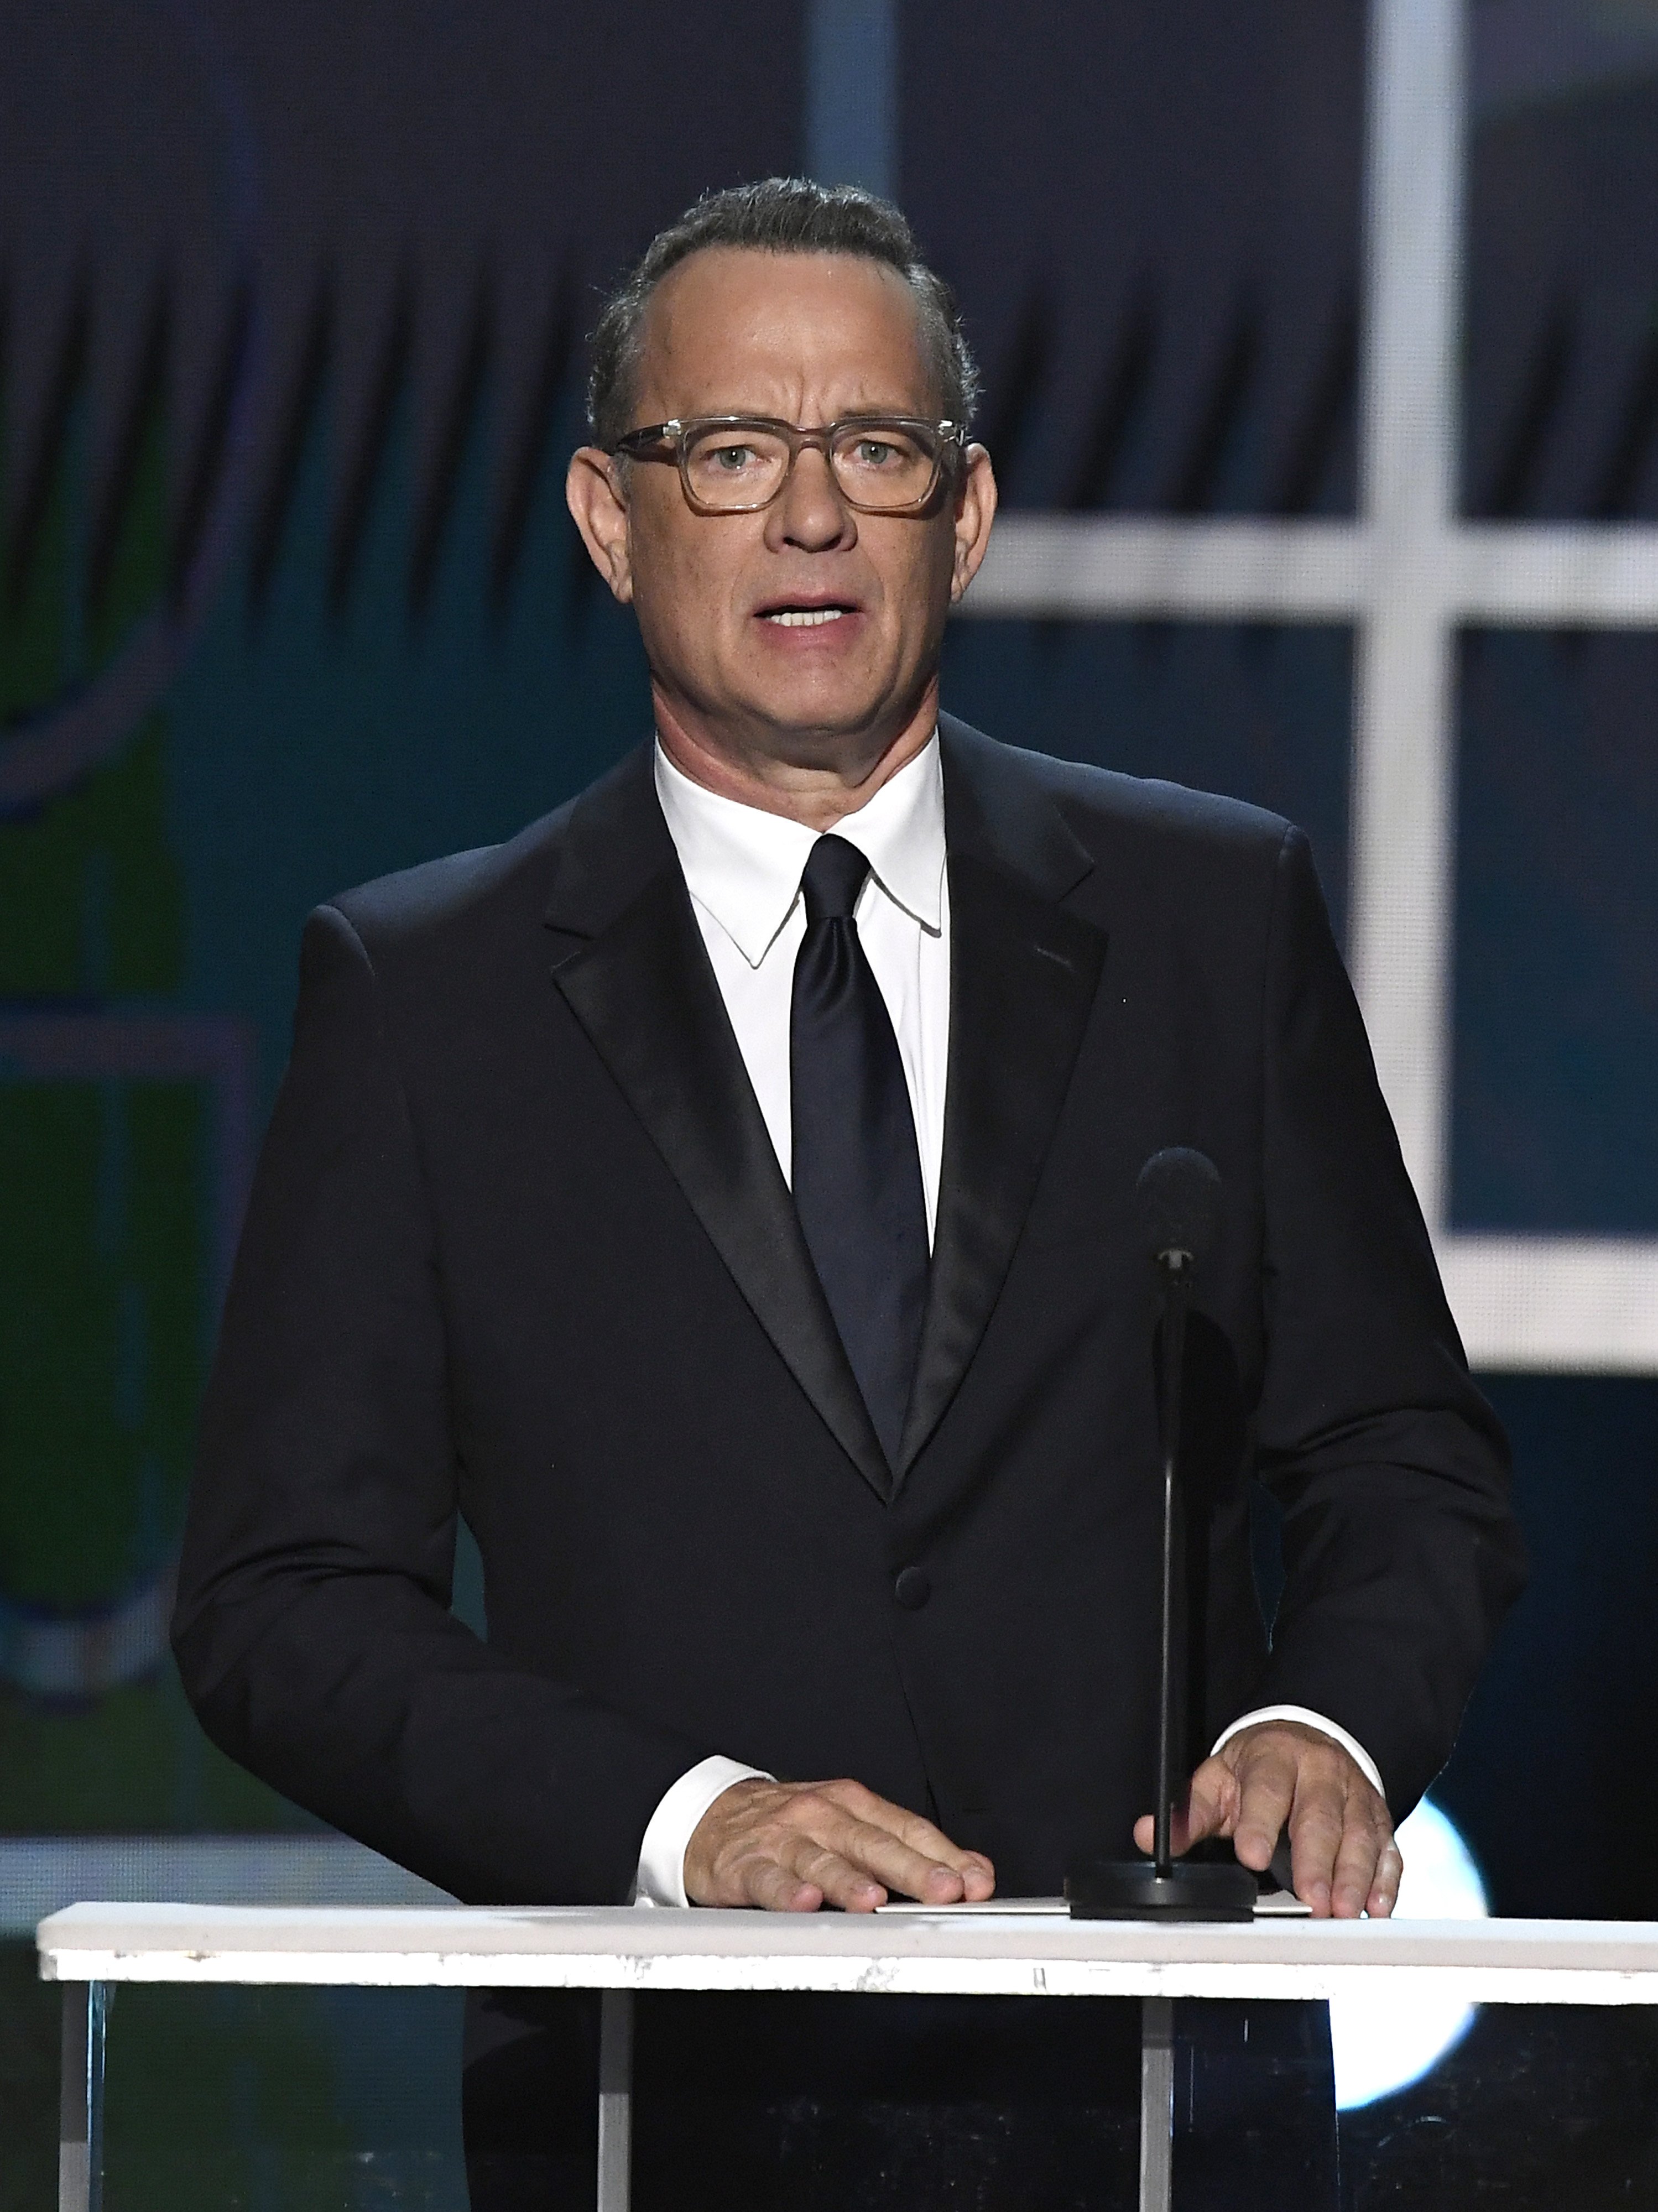 Tom Hanks speaks during the 26th Annual Screen Actors Guild Awards on January 19, 2020, in Los Angeles, California. | Source: Getty Images.